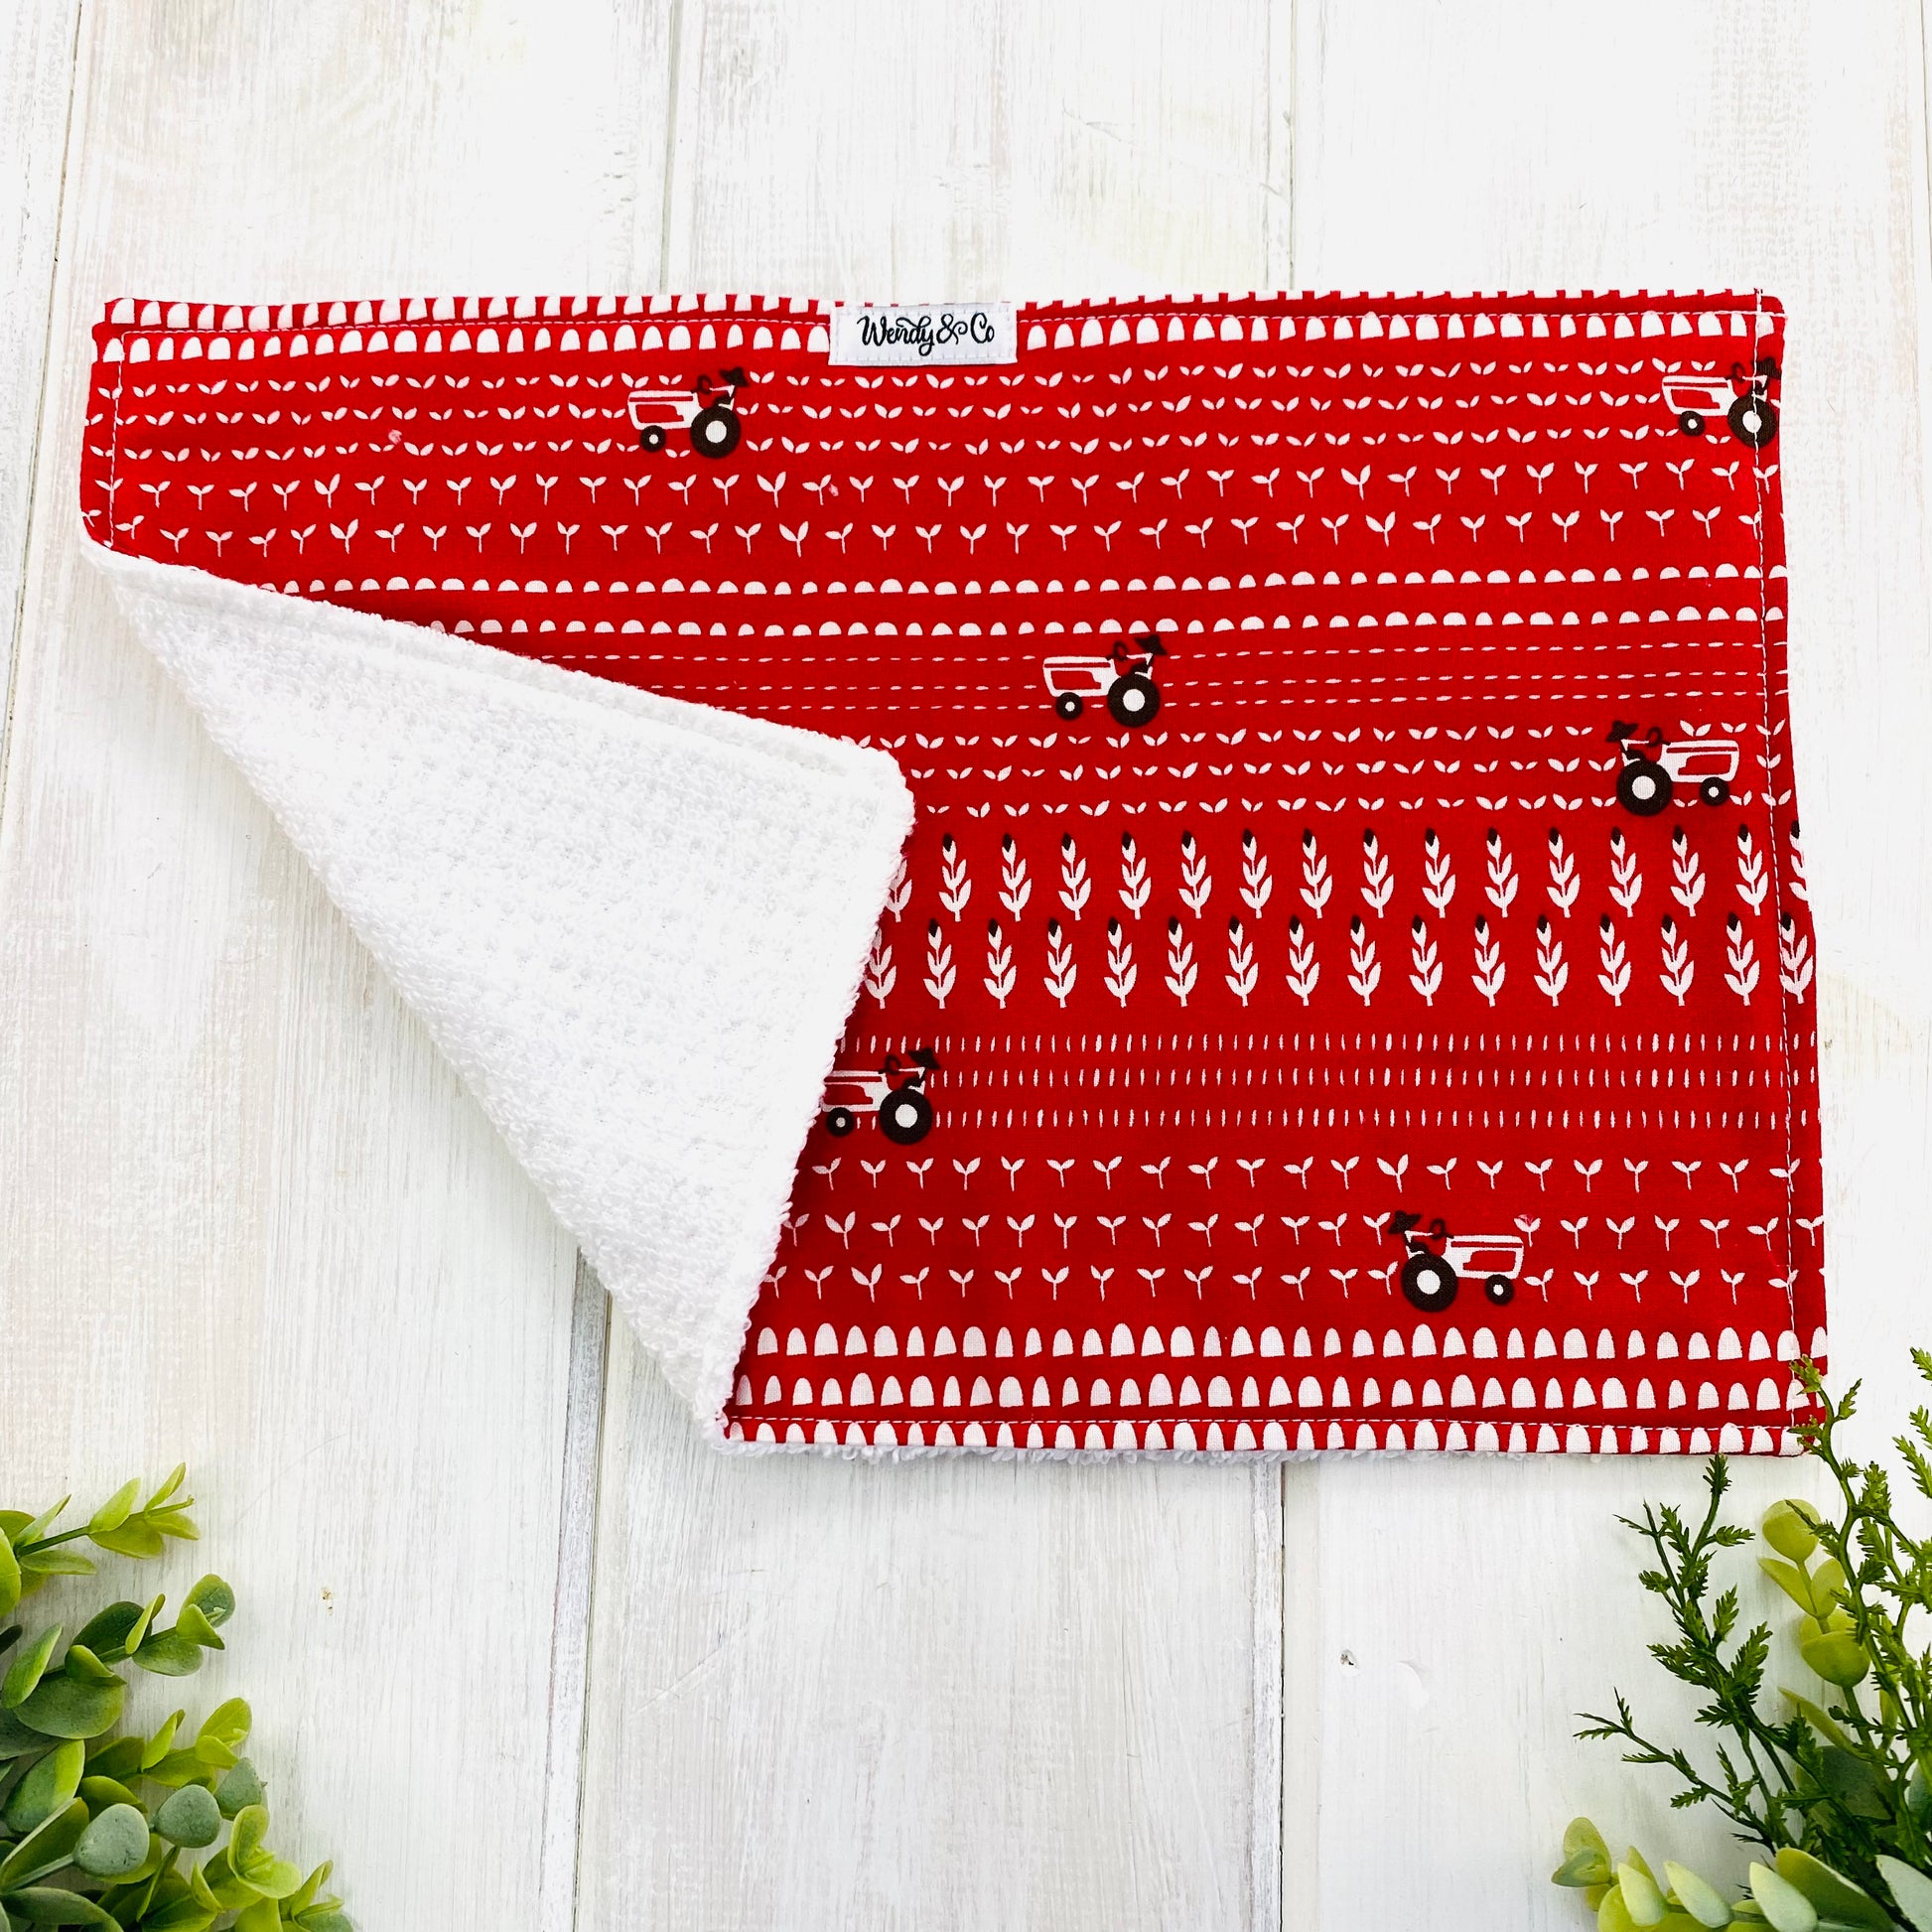 Very absorbent burp cloth drool rag for baby in red tractor print.